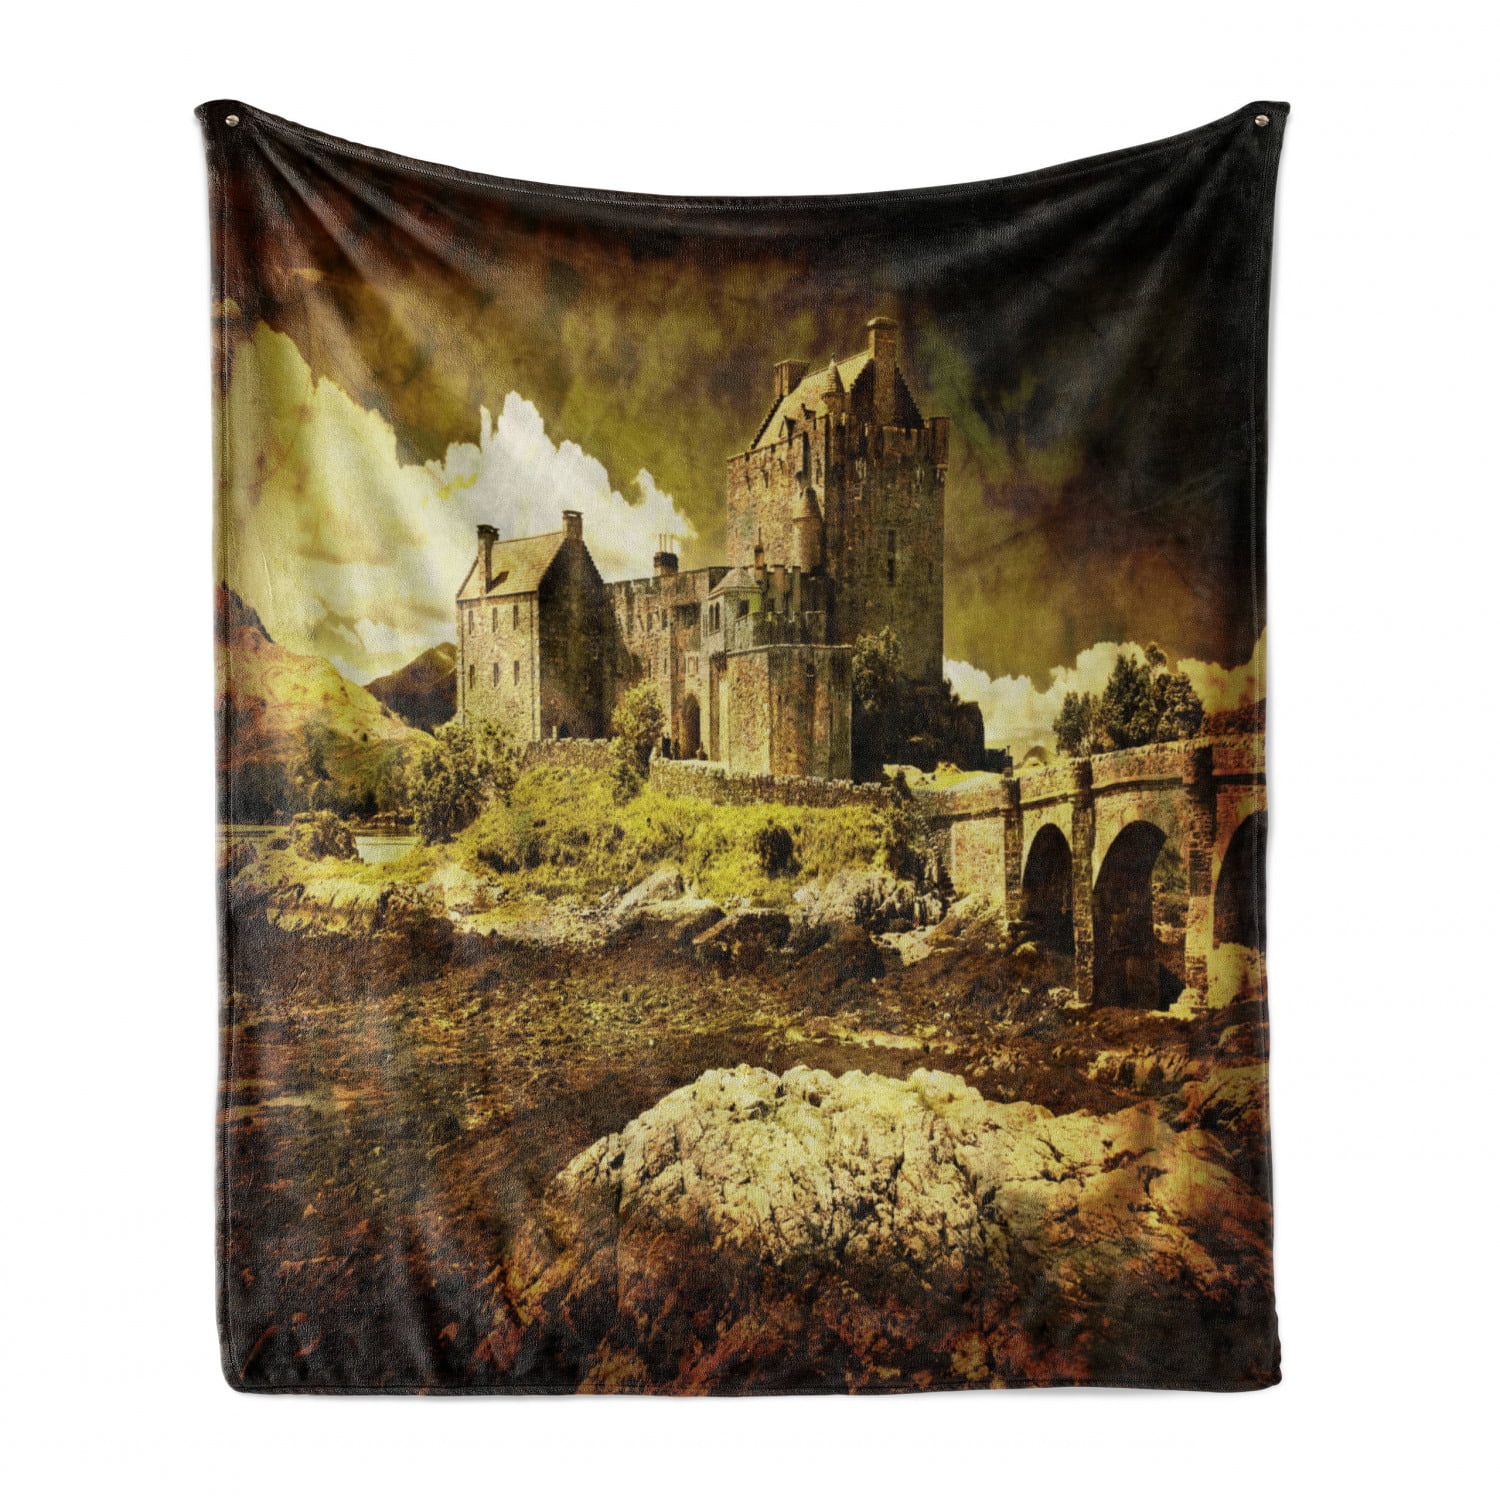 Cozy Plush for Indoor and Outdoor Use Grey Green 50 x 60 Old Scottish Castle Vintage Style European Middle Age Culture Heritage Town Photo Ambesonne Medieval Soft Flannel Fleece Throw Blanket 